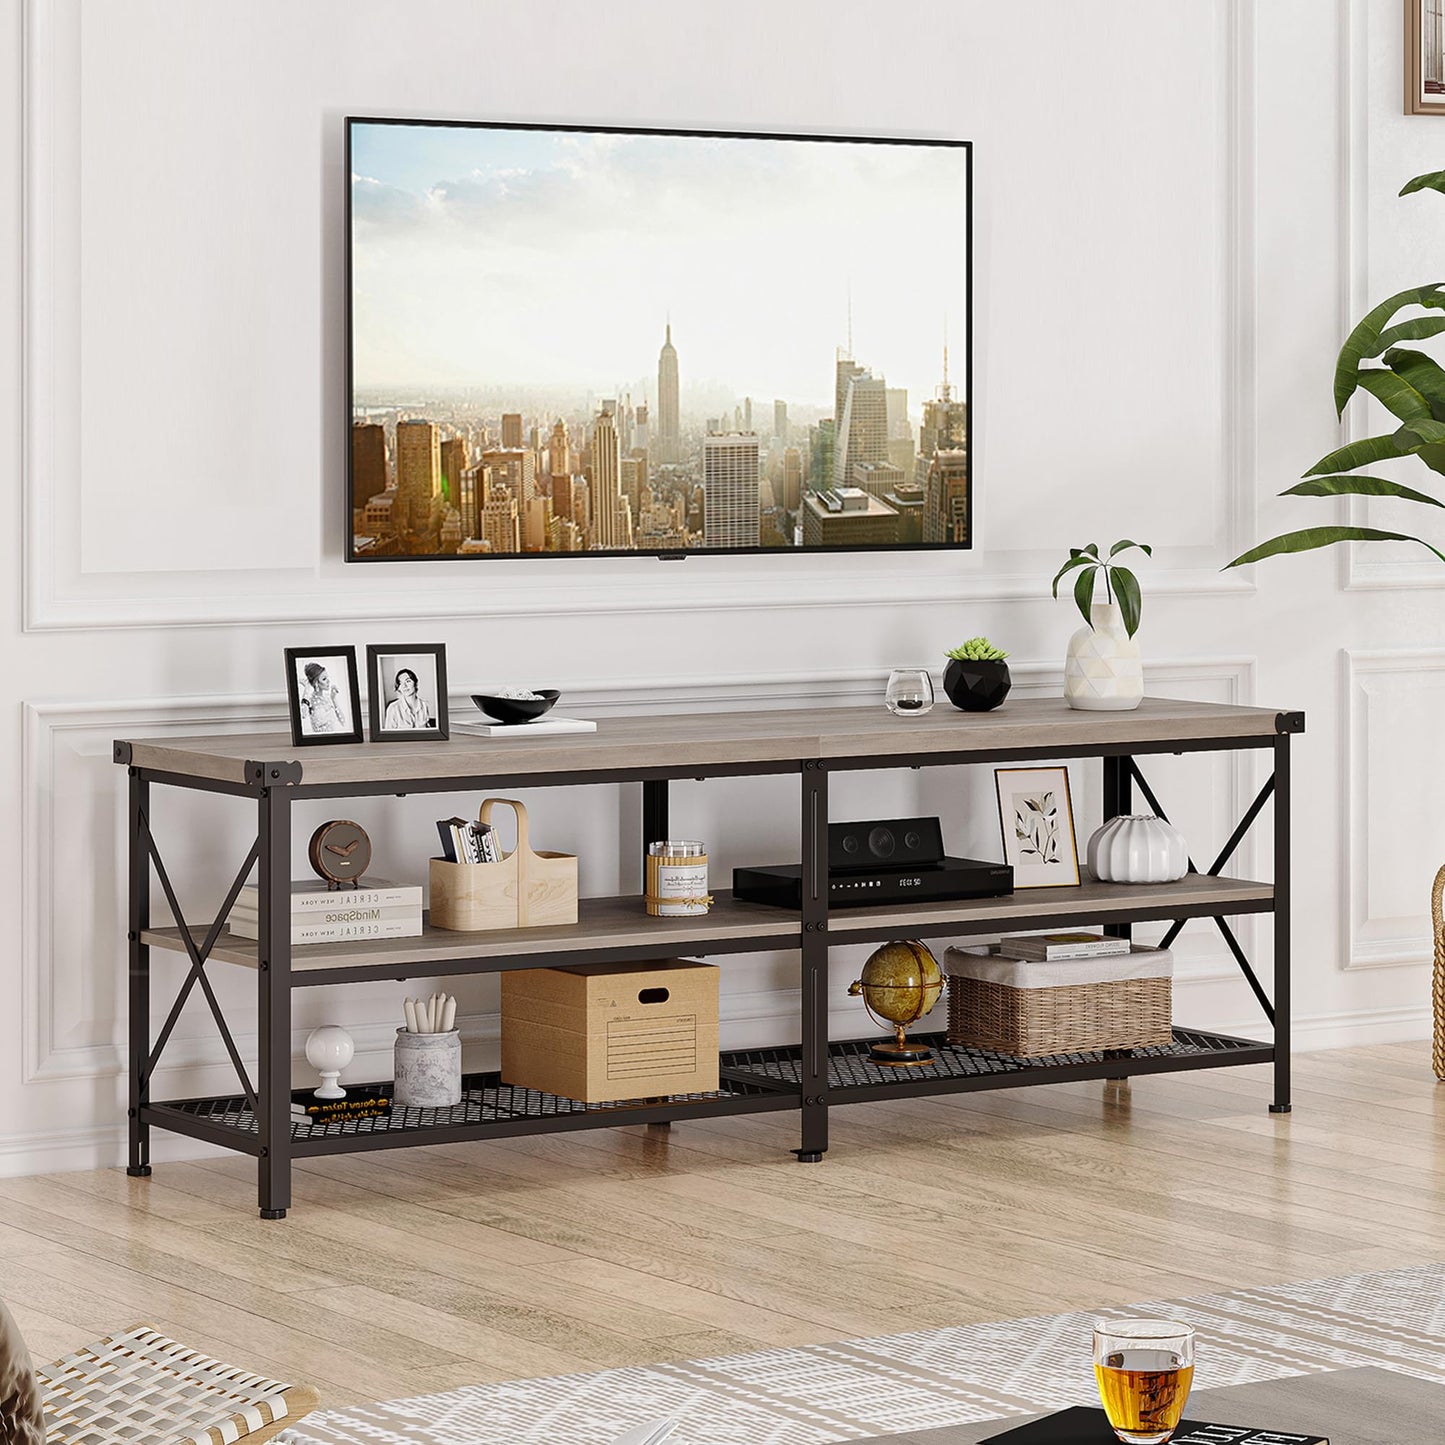 IDEALHOUSE TV Stand for 65 70 Inch TV, Industrial Entertainment Center TV Media Console Table, Farmhouse TV Stand with Storage Shelves, Gray TV